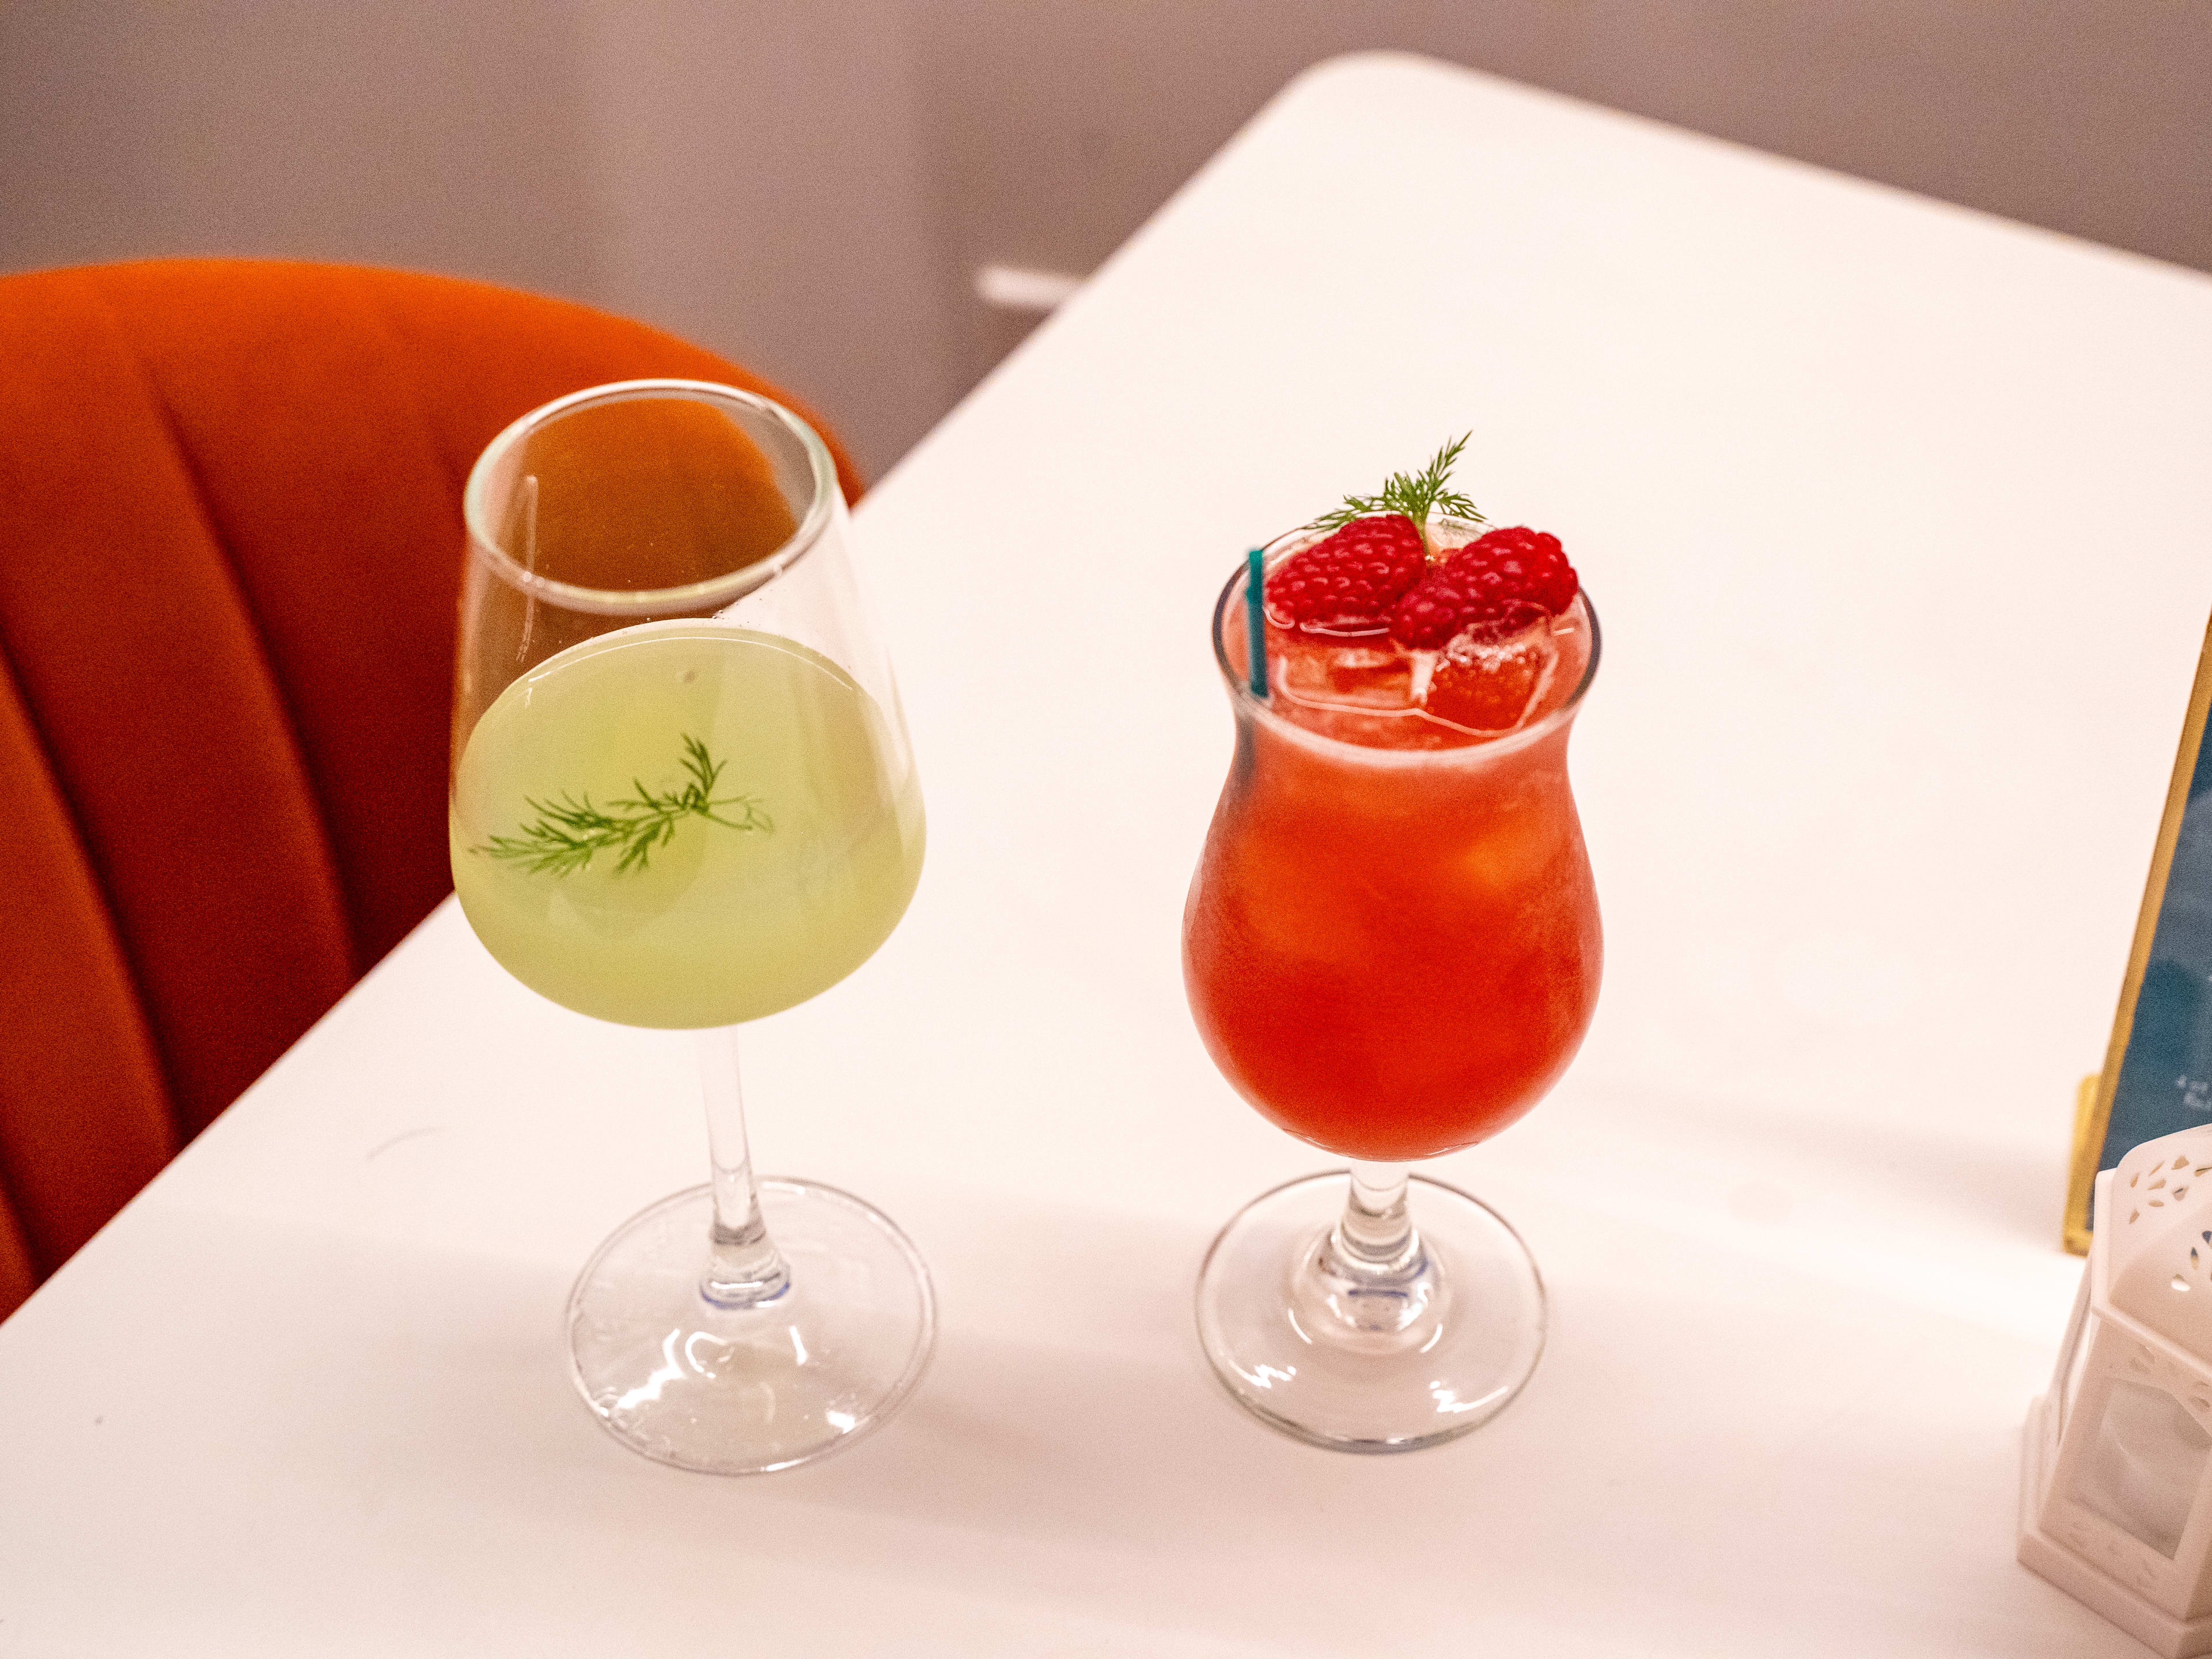 Two drinks with fruit and herb garnishes on a table